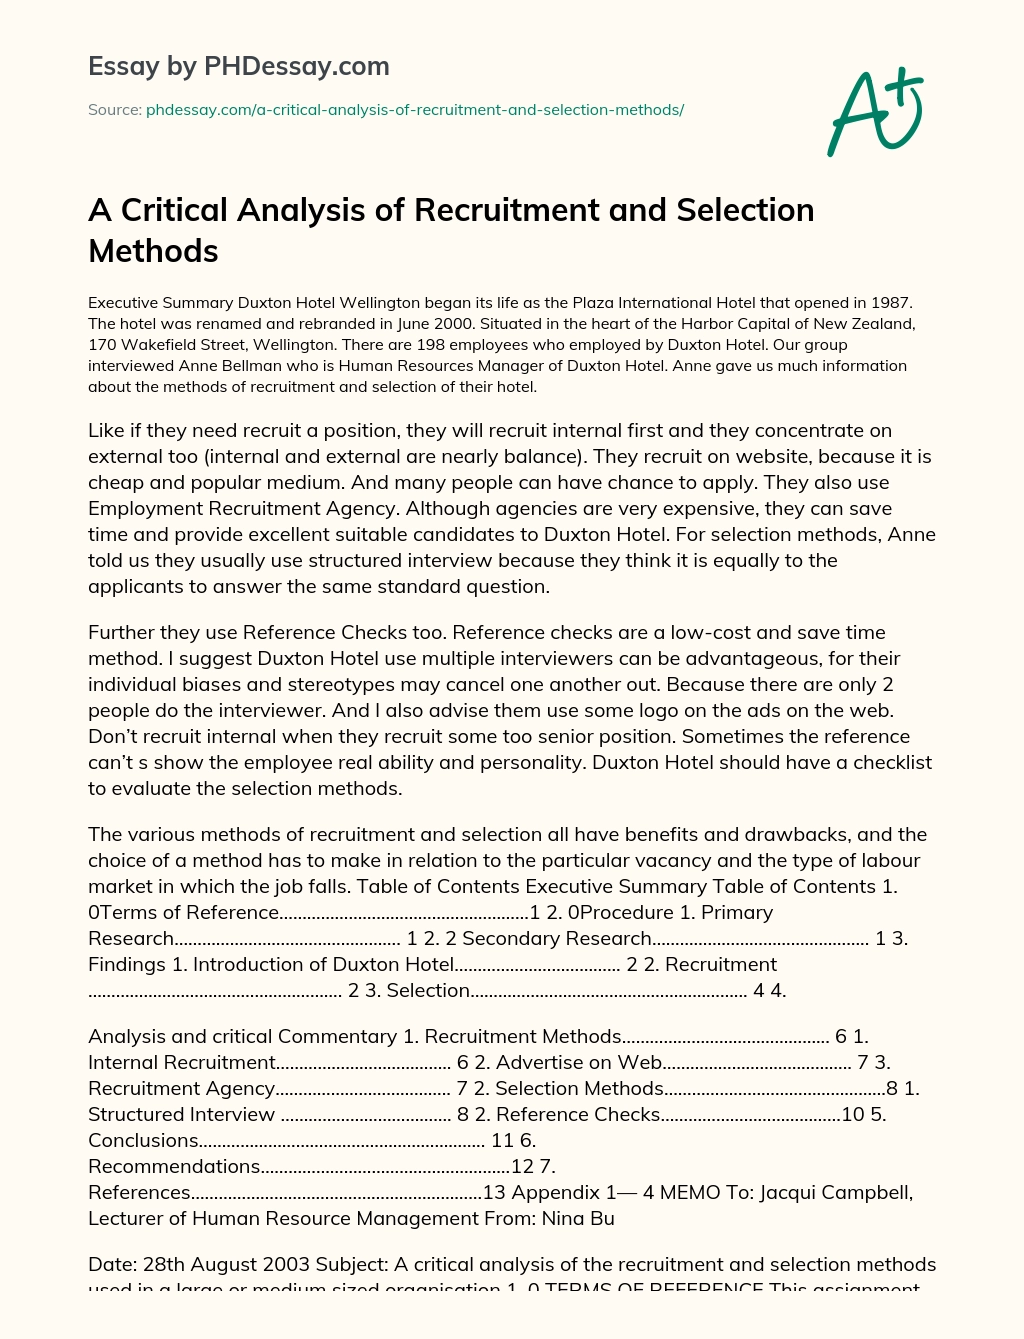 A Critical Analysis of Recruitment and Selection Methods essay